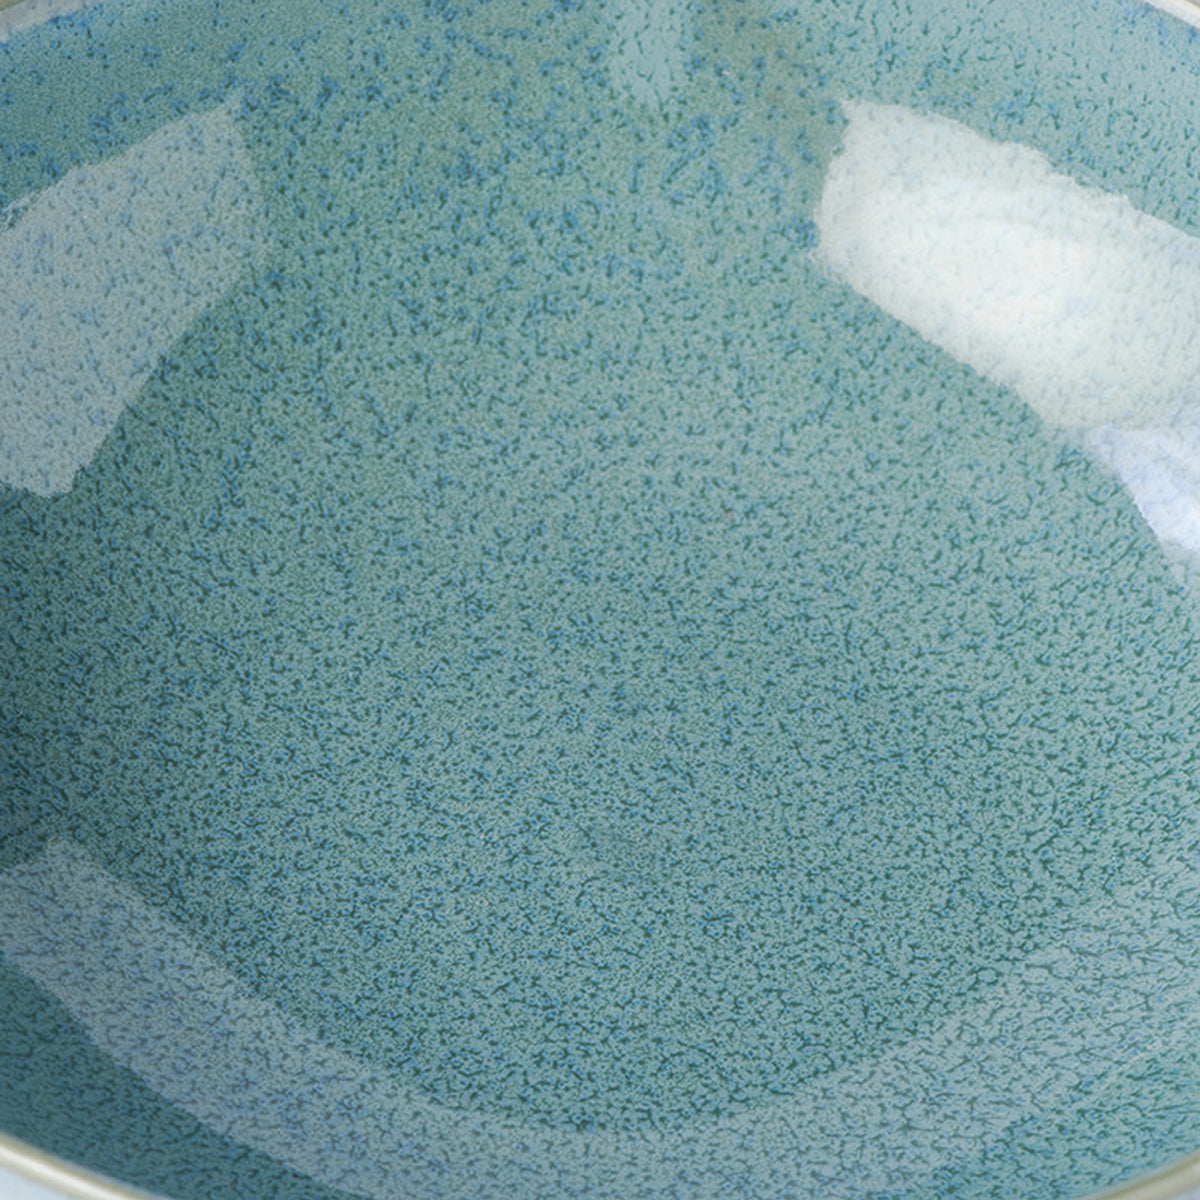 MIJ Oval Peacock Japanese Cat Bowl, In Turquoise & Sage Tones | at Made Moggie